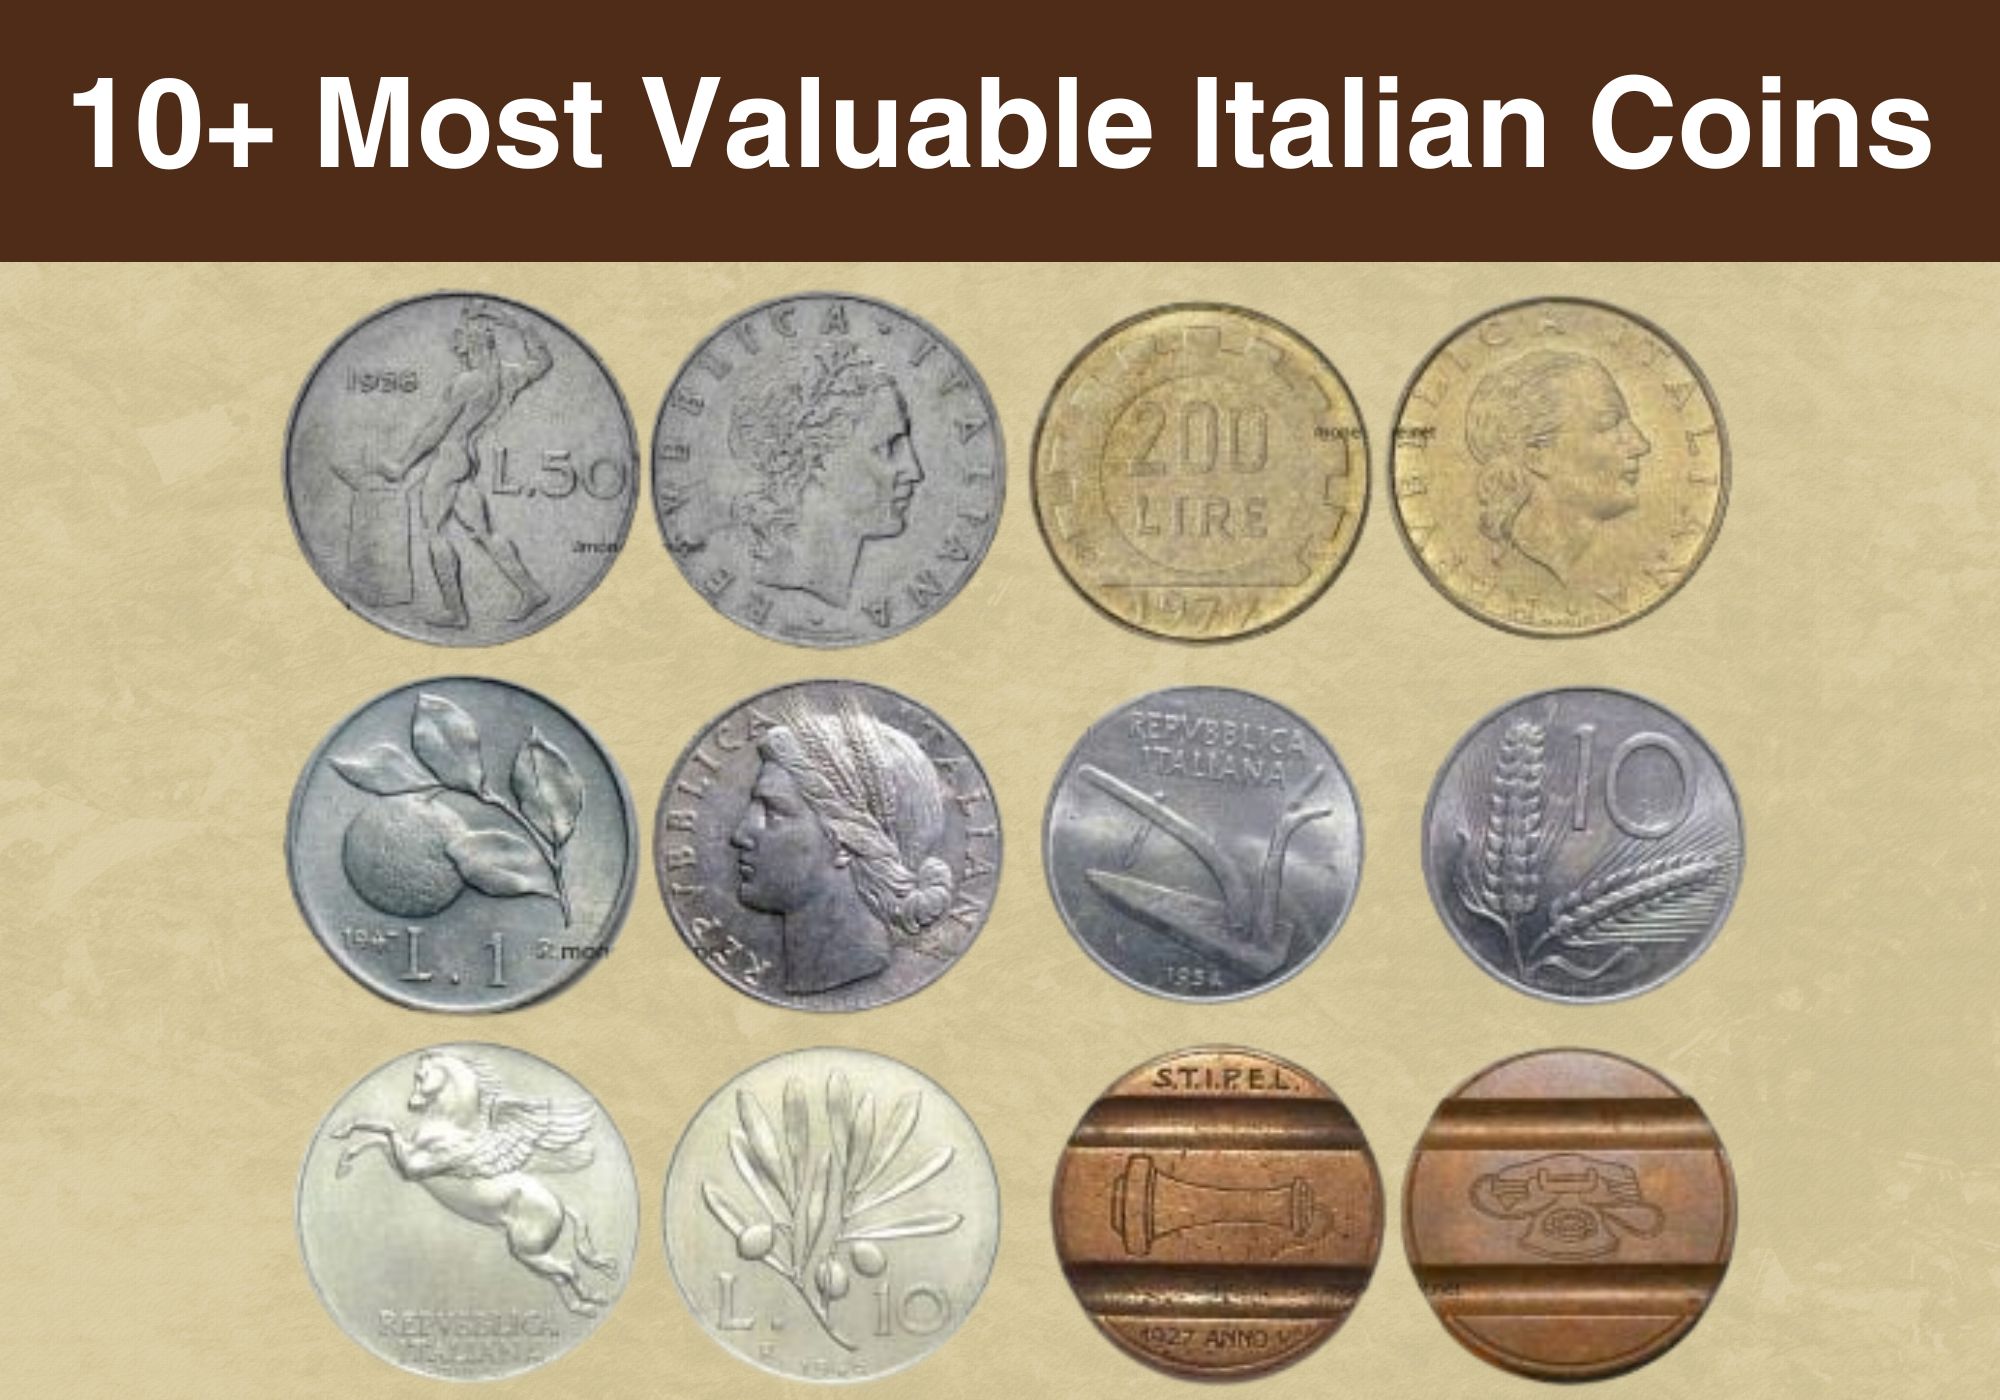 10+ Most Valuable Italian Coins